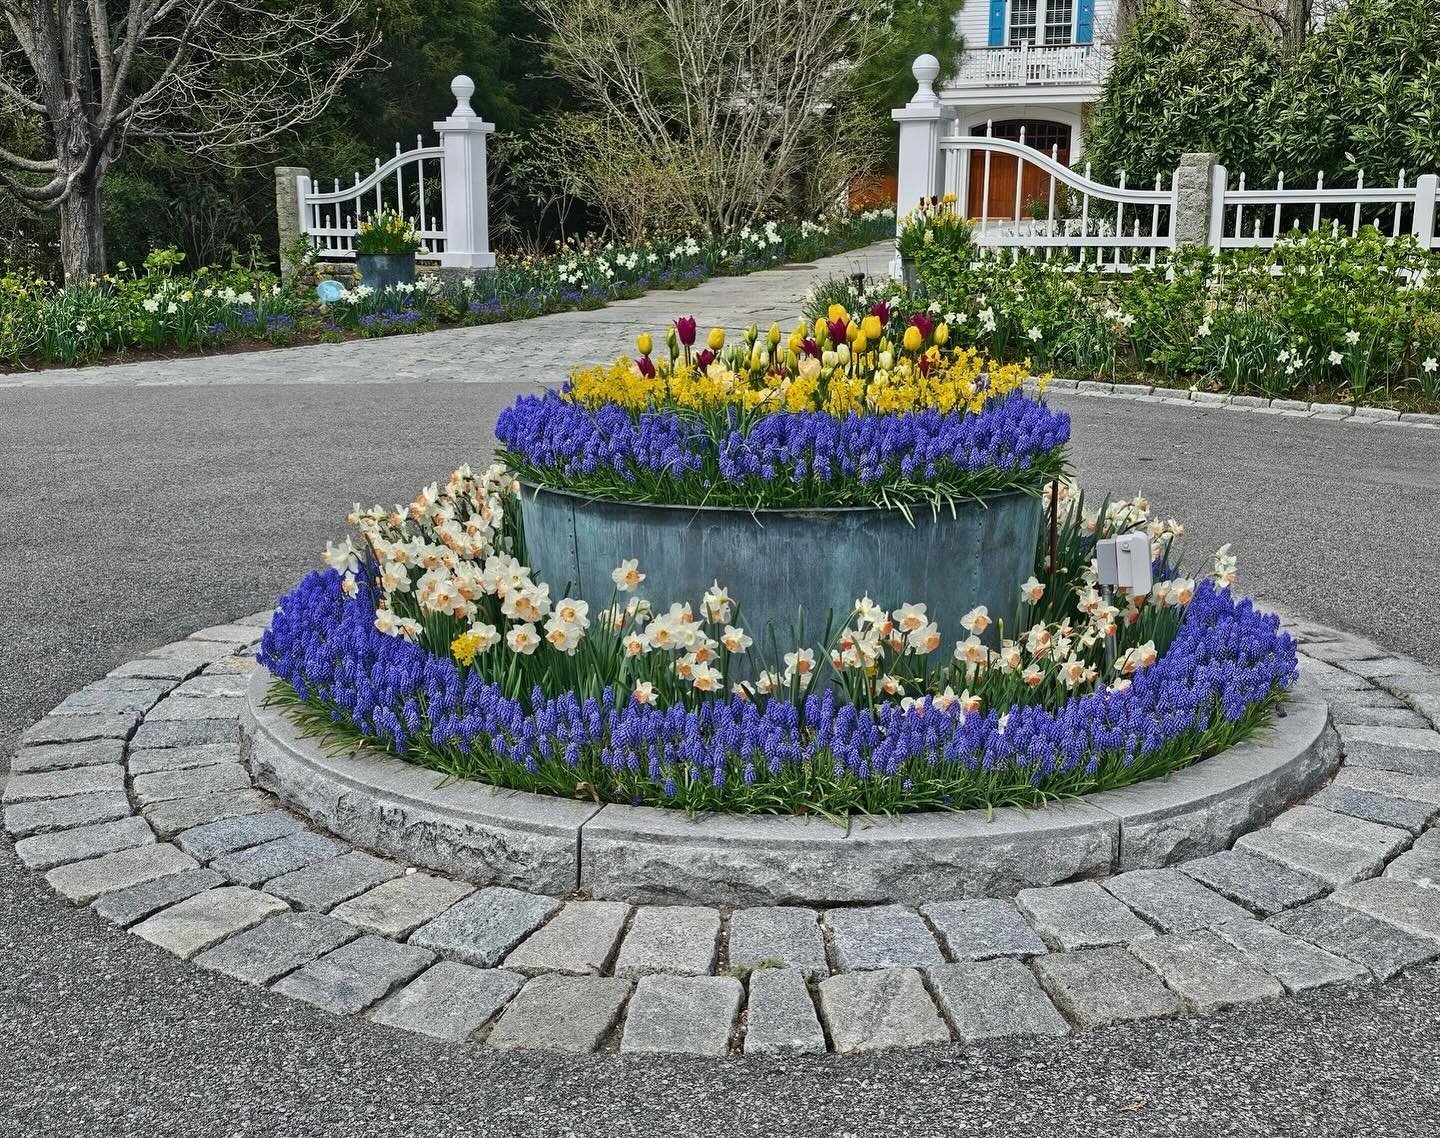 Spring on Cape Cod is captured in this entry display of flowering bulbs created by our maintenance and seasonal color team.